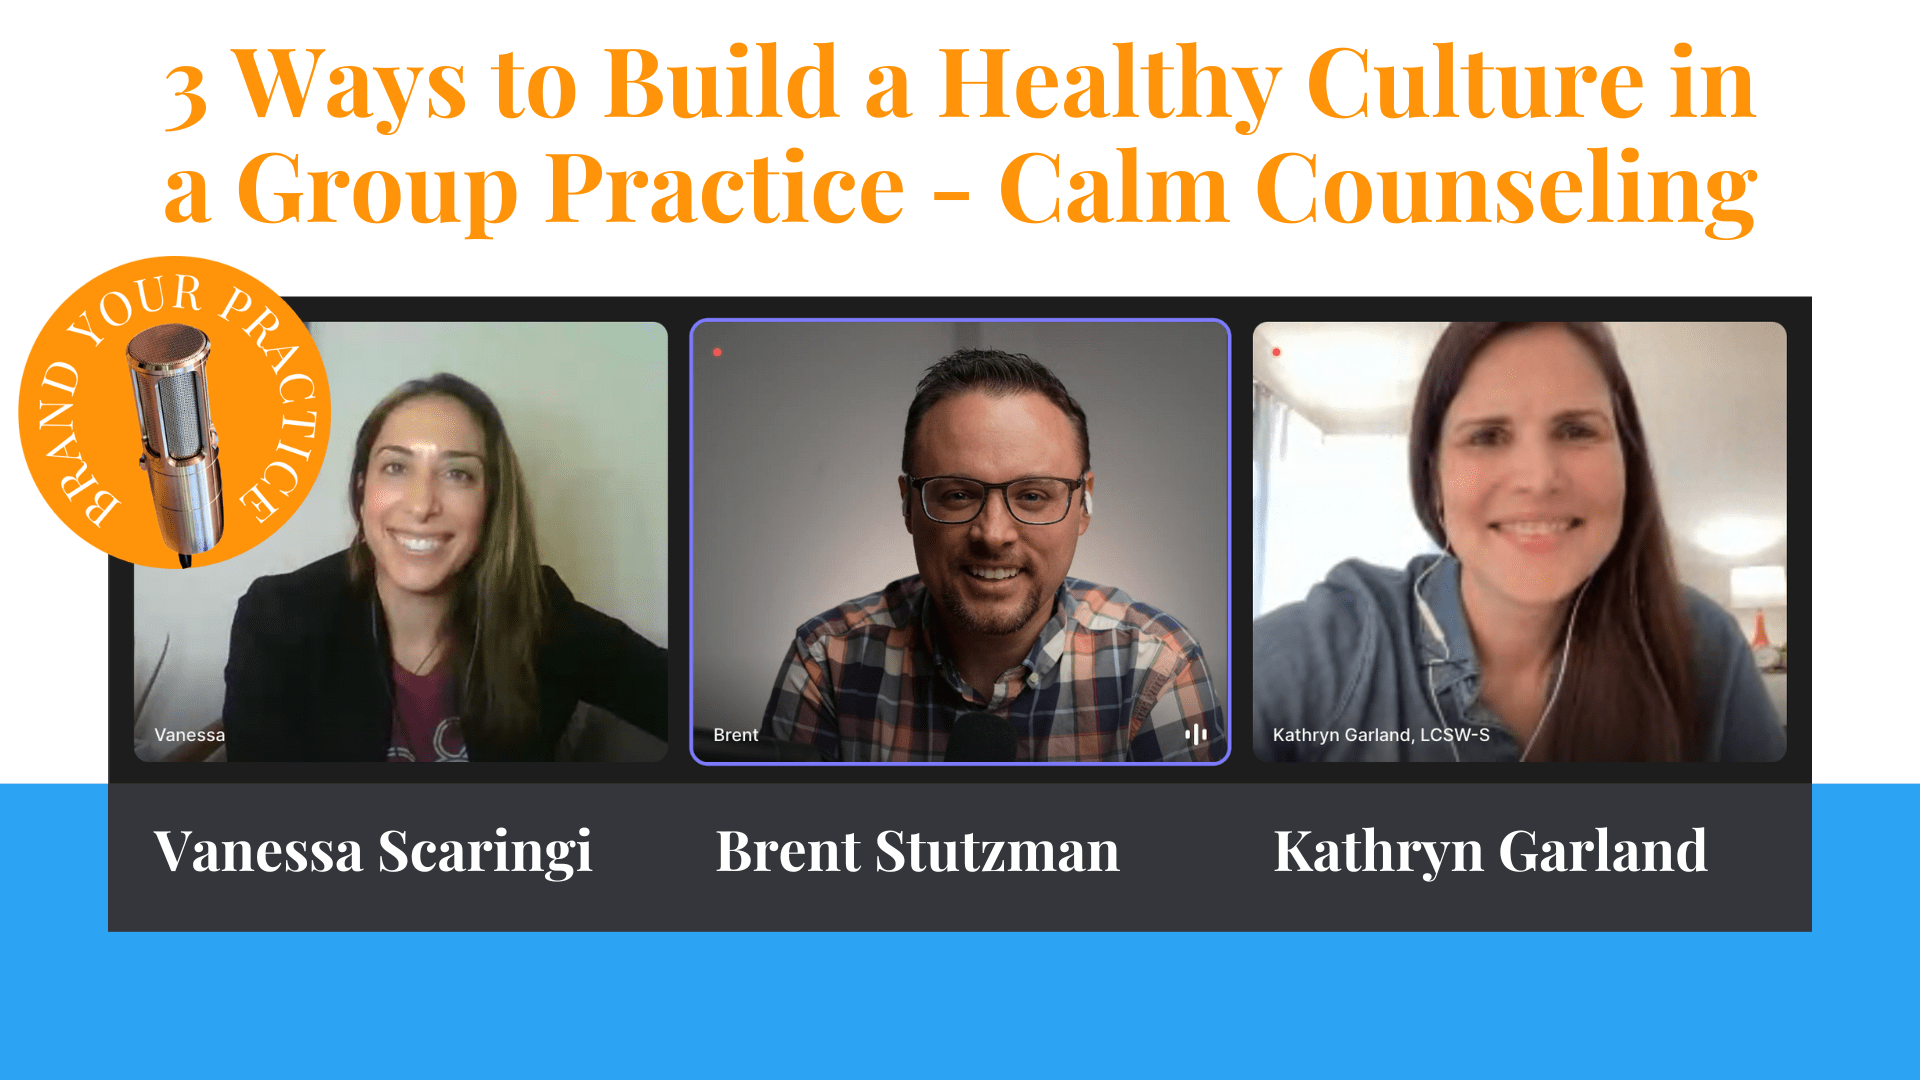 3 Ways to Build a Healthy Culture in a Group Practice